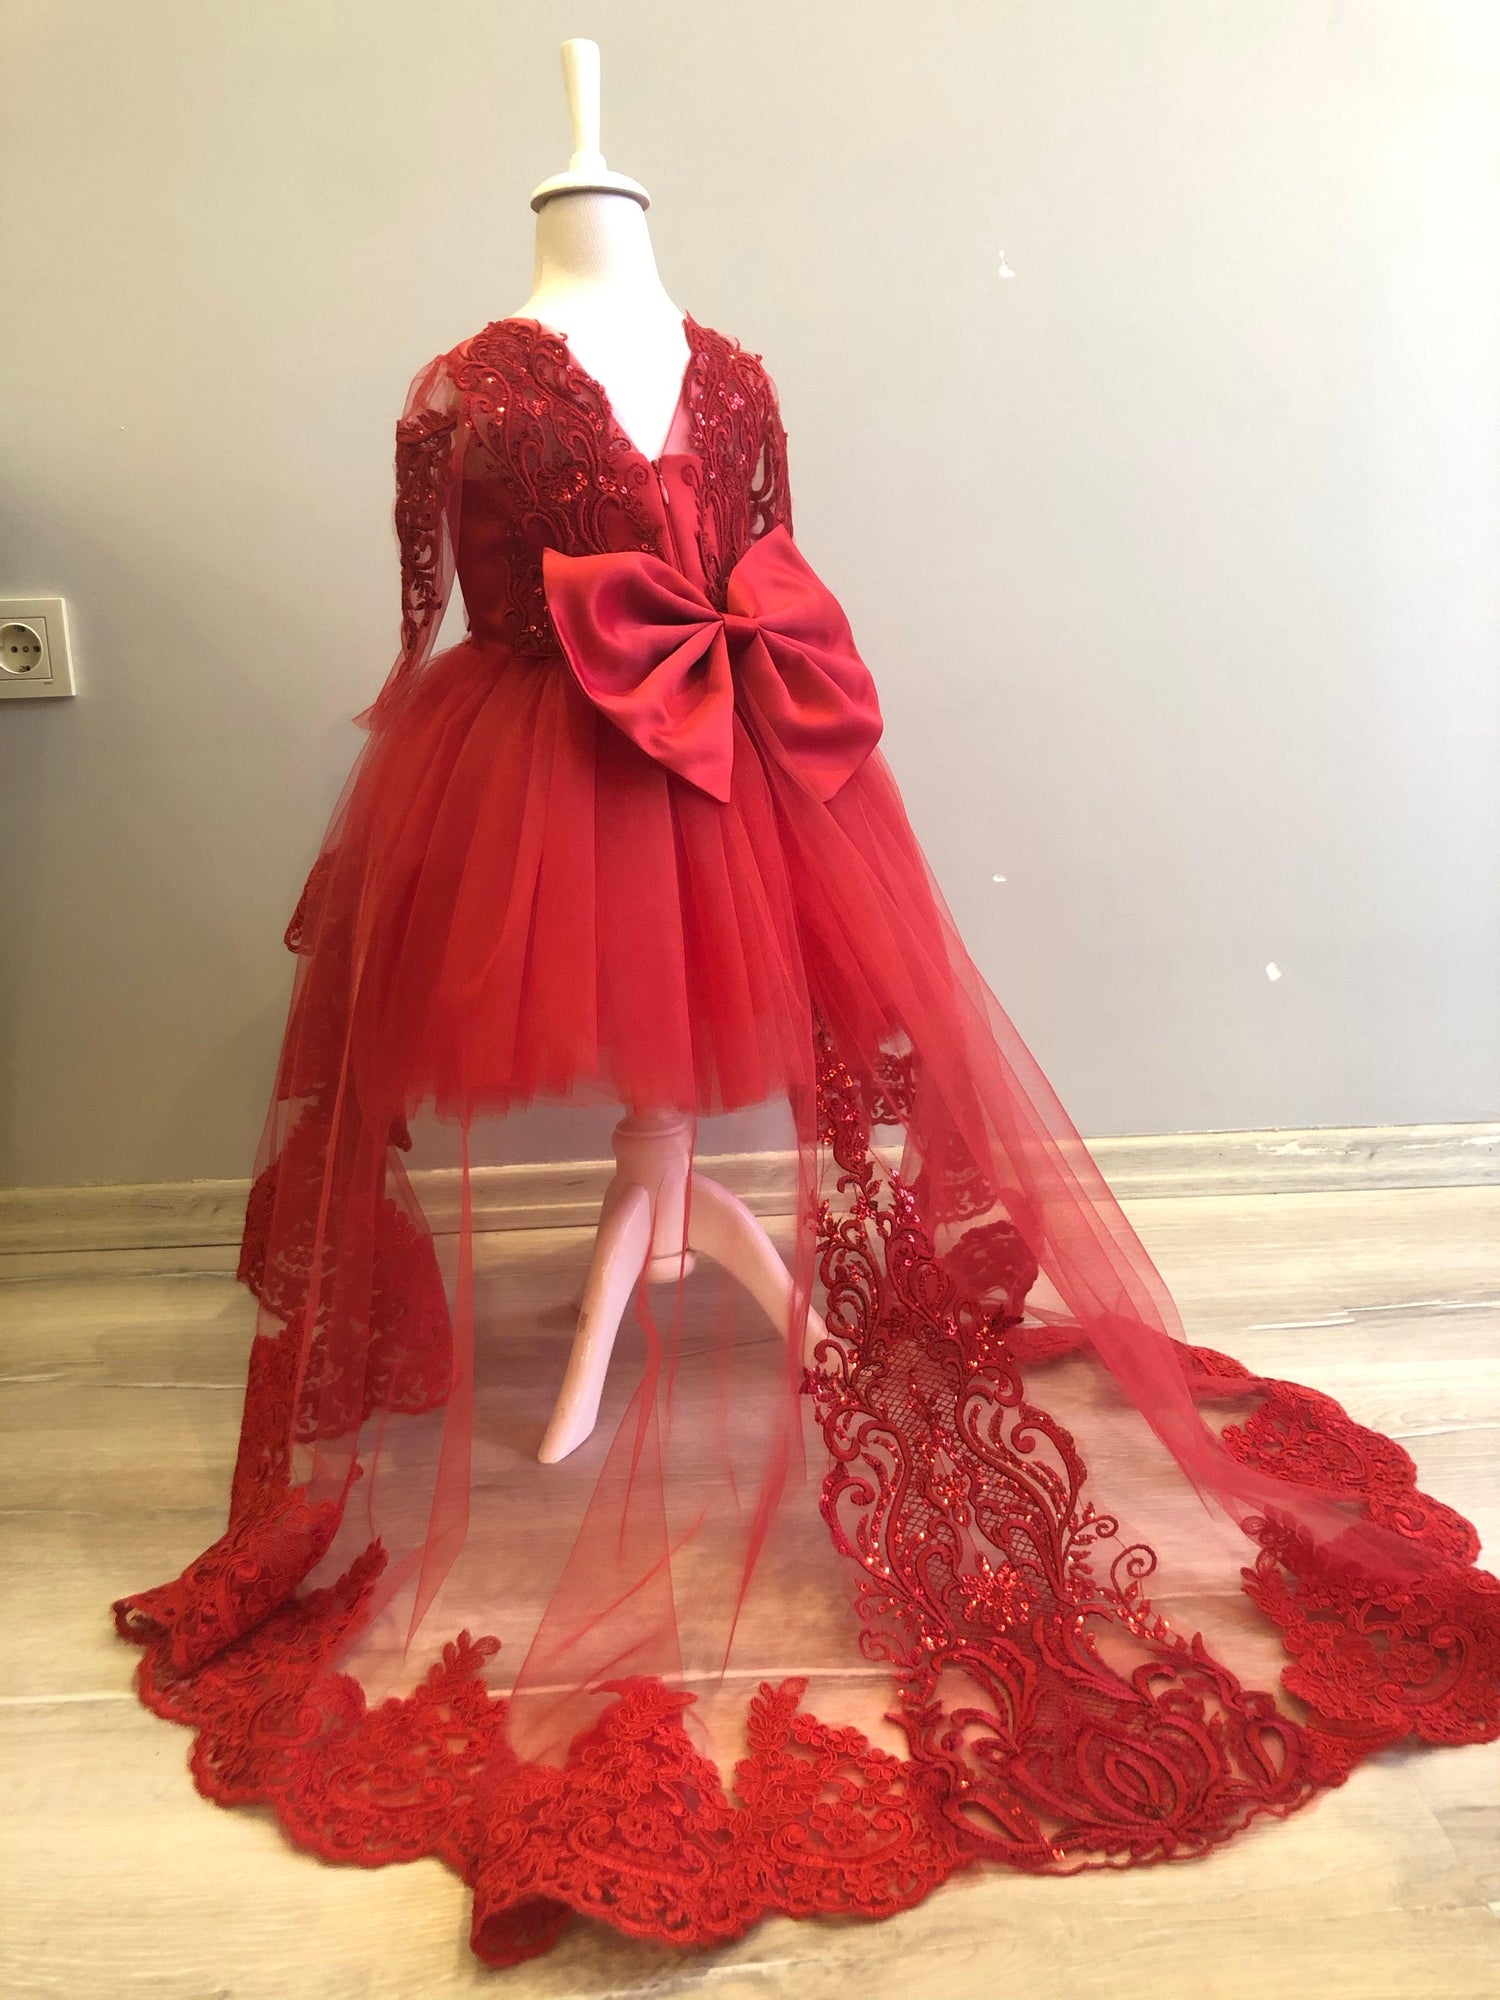 Red flower dress with lace tail - MyBabyByMerry 